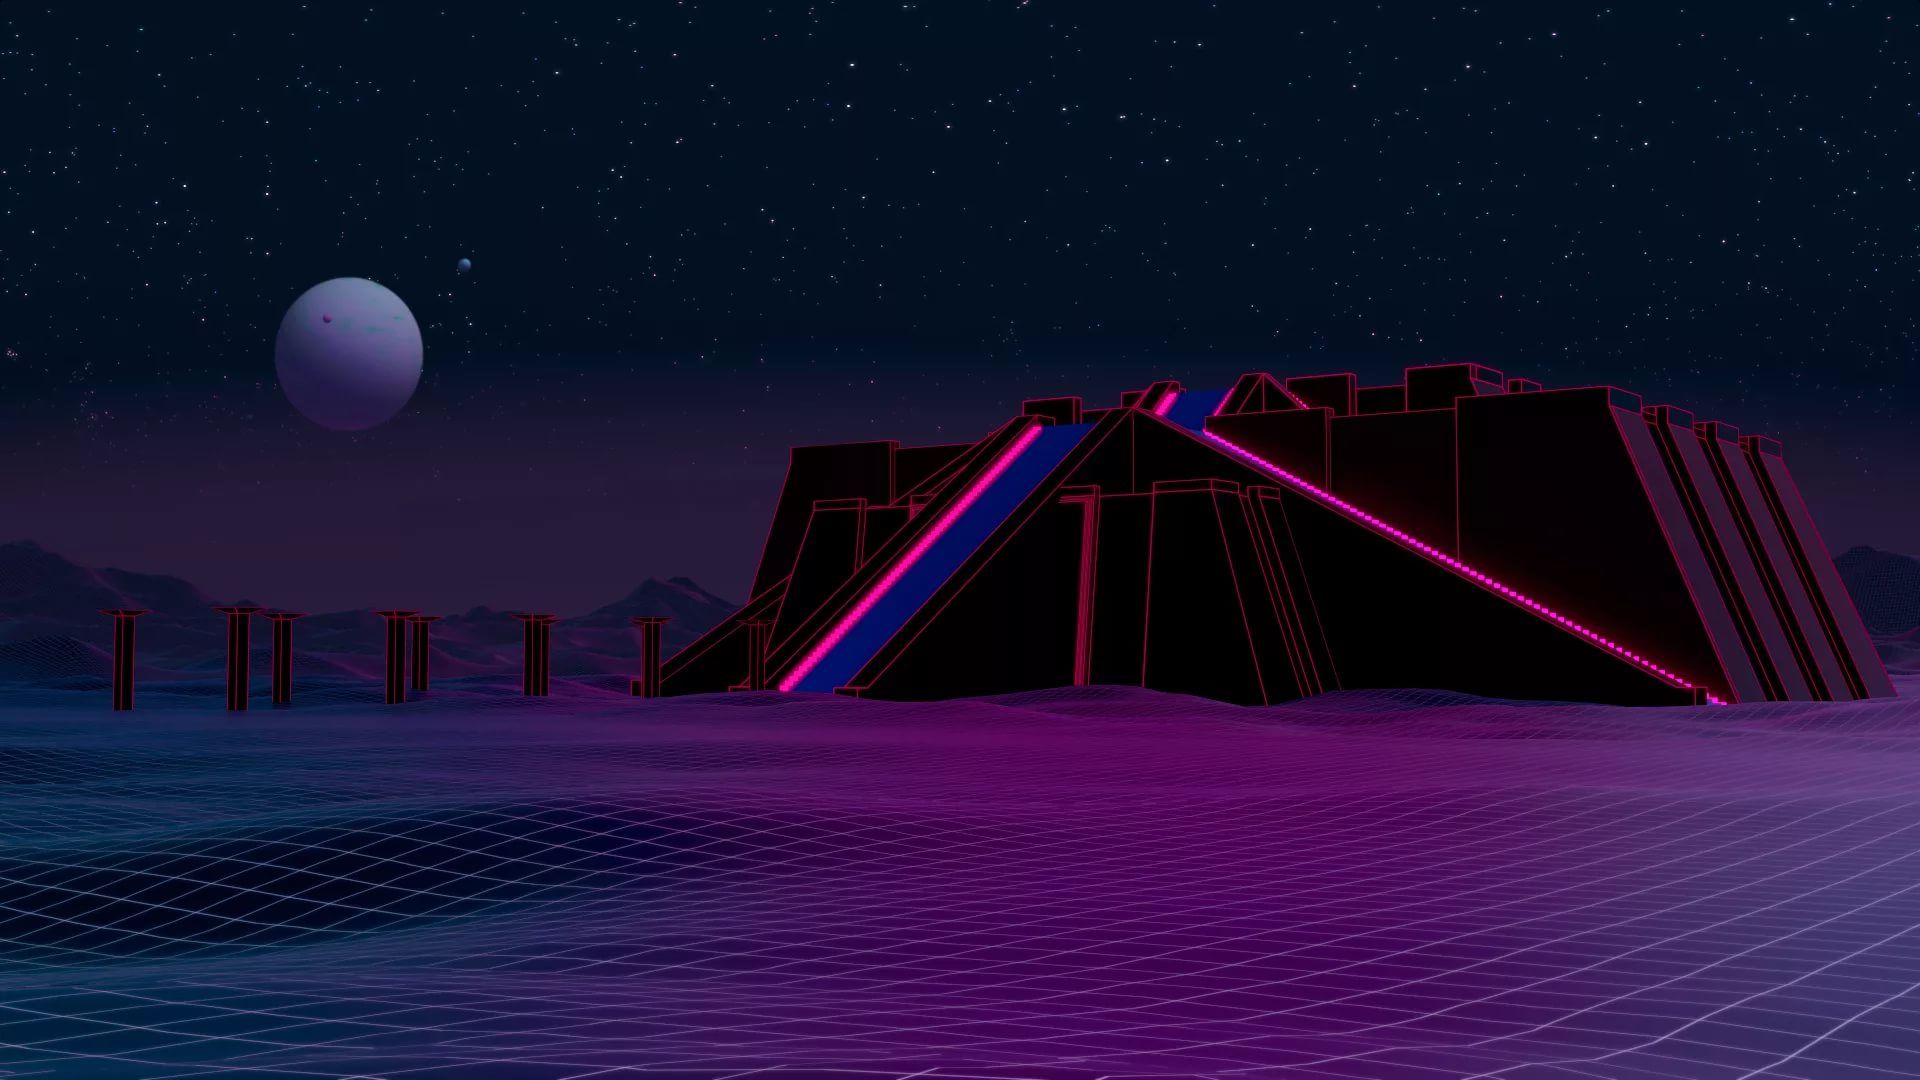 A futuristic landscape with purple lighting - Synthwave